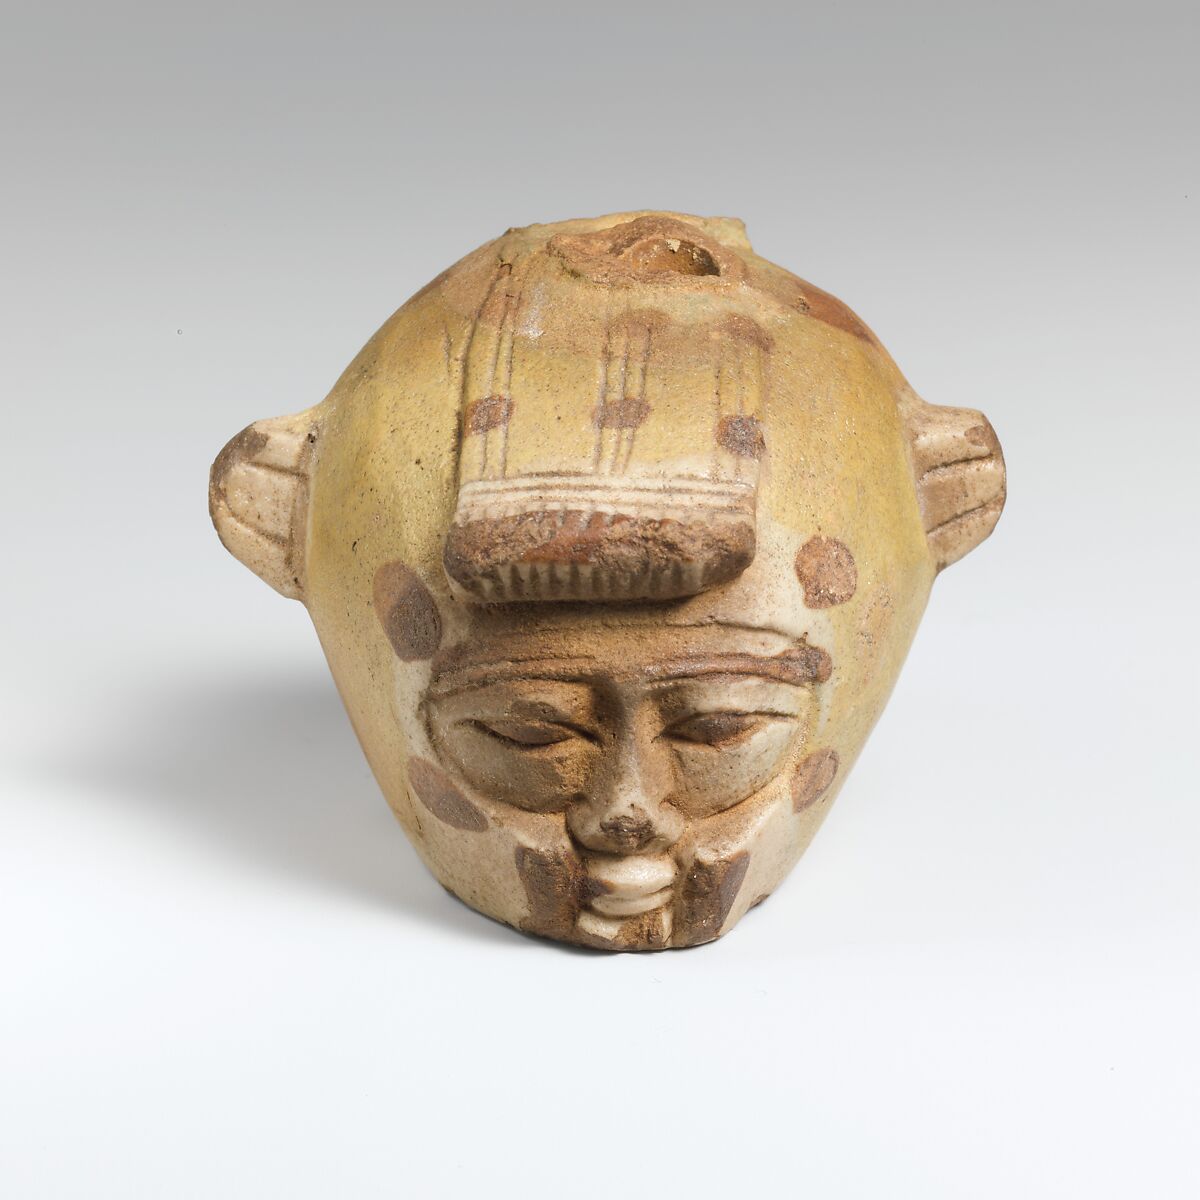 Faience aryballos (oil flask) in the form of a head wearing an animal skin, Faience, East Greek 